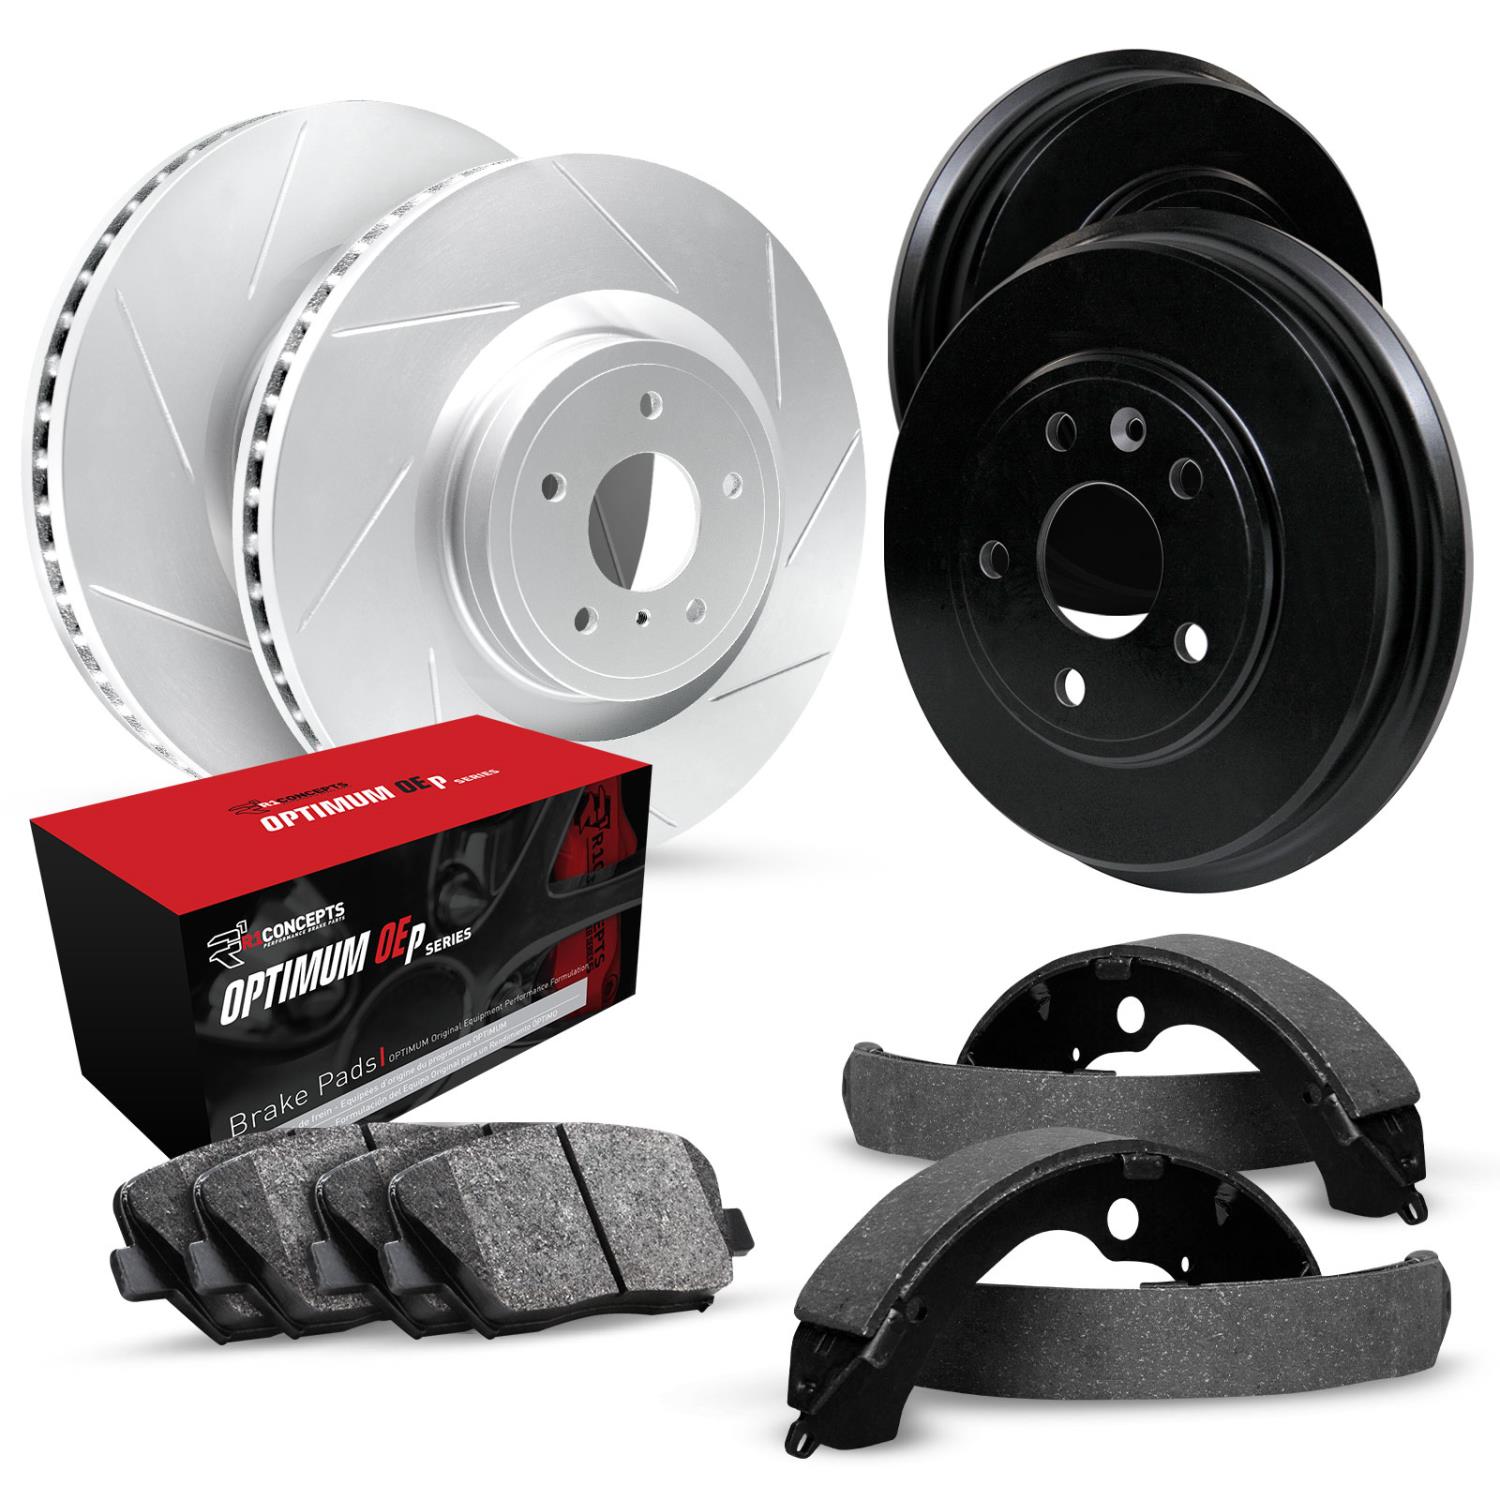 GEO-Carbon Slotted Brake Rotor & Drum Set w/Optimum OE Pads & Shoes, 1988-1995 Infiniti/Nissan, Position: Front & Rear